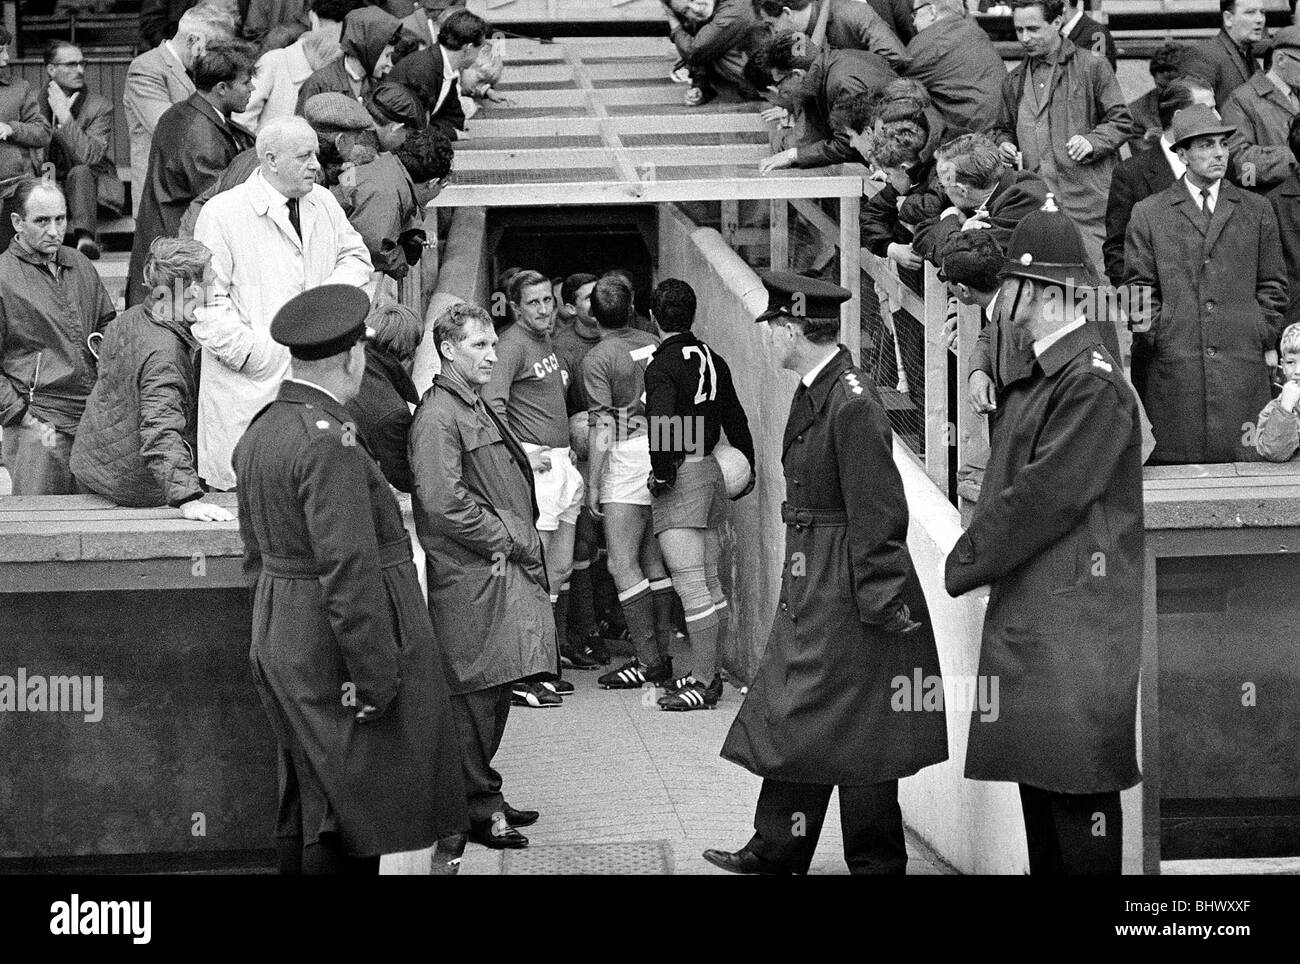 World Cup Russia versus Chile 20th July 1966 The two teams come onto the field Fans peer over the sides of the tunnel to see the players W7028 5a Staff Photographer Stock Photo